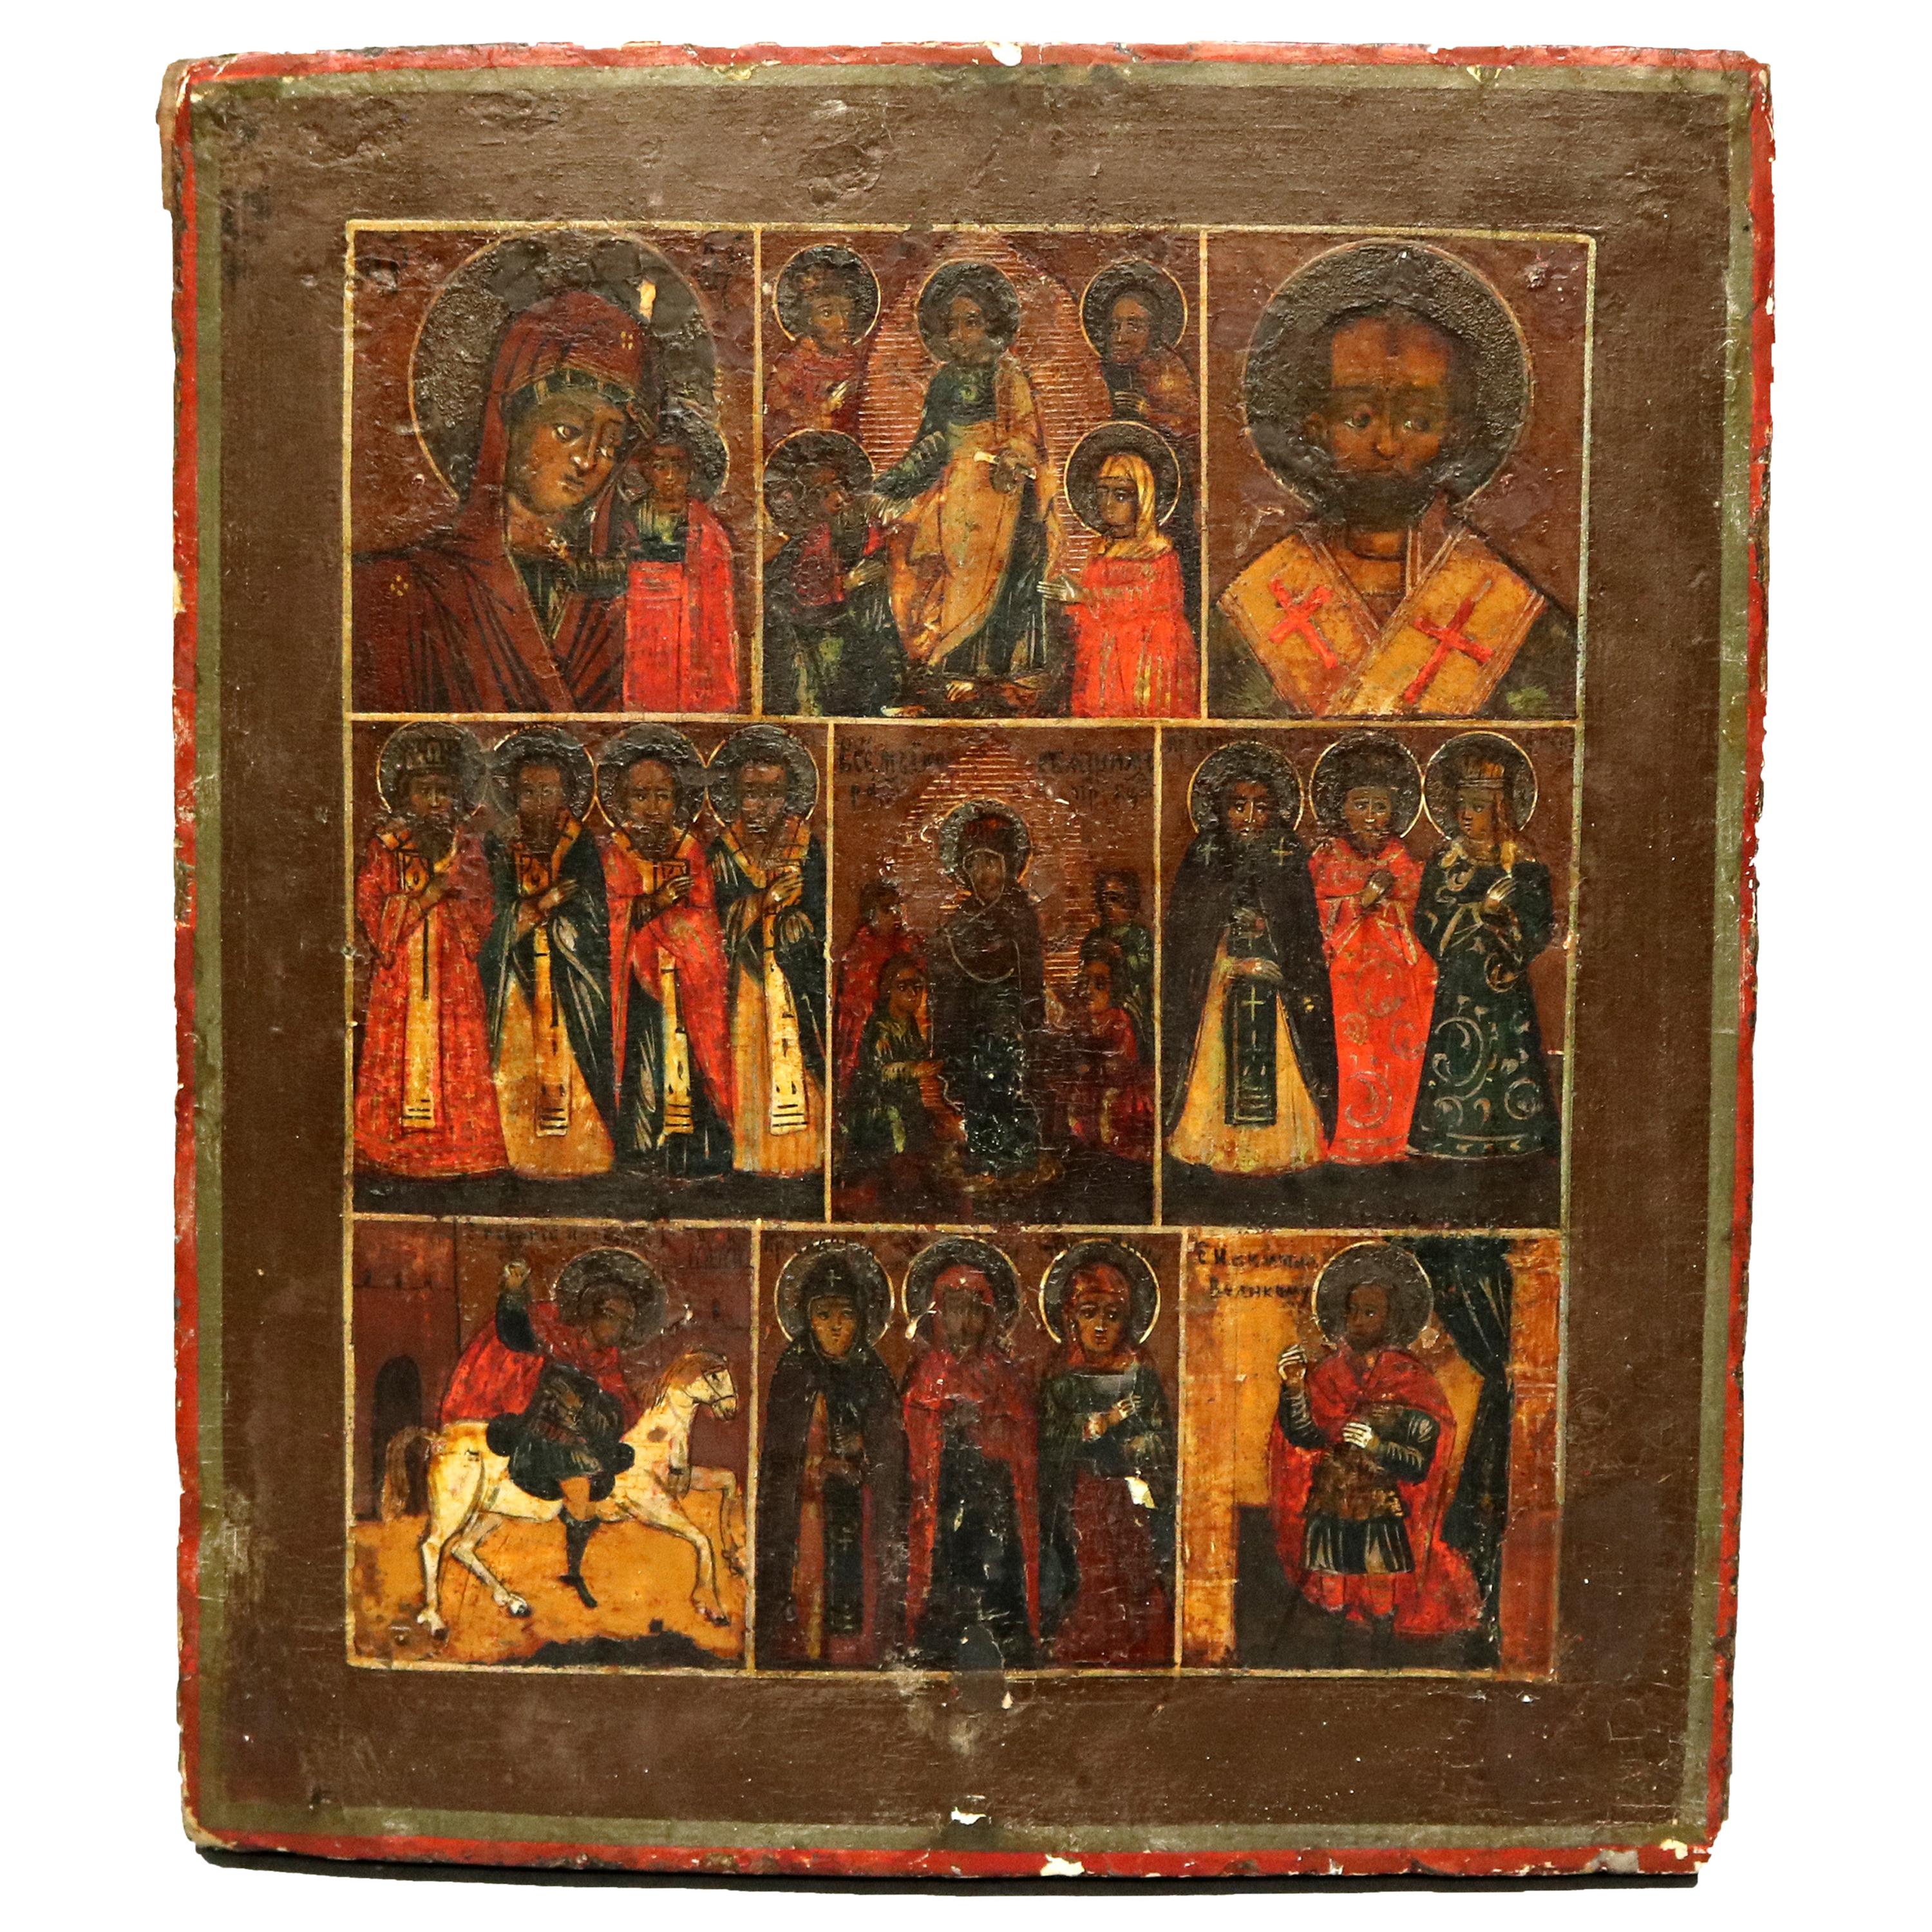 Antique Russian Orthodox Icon, Painting on Board, 18th-19th Century